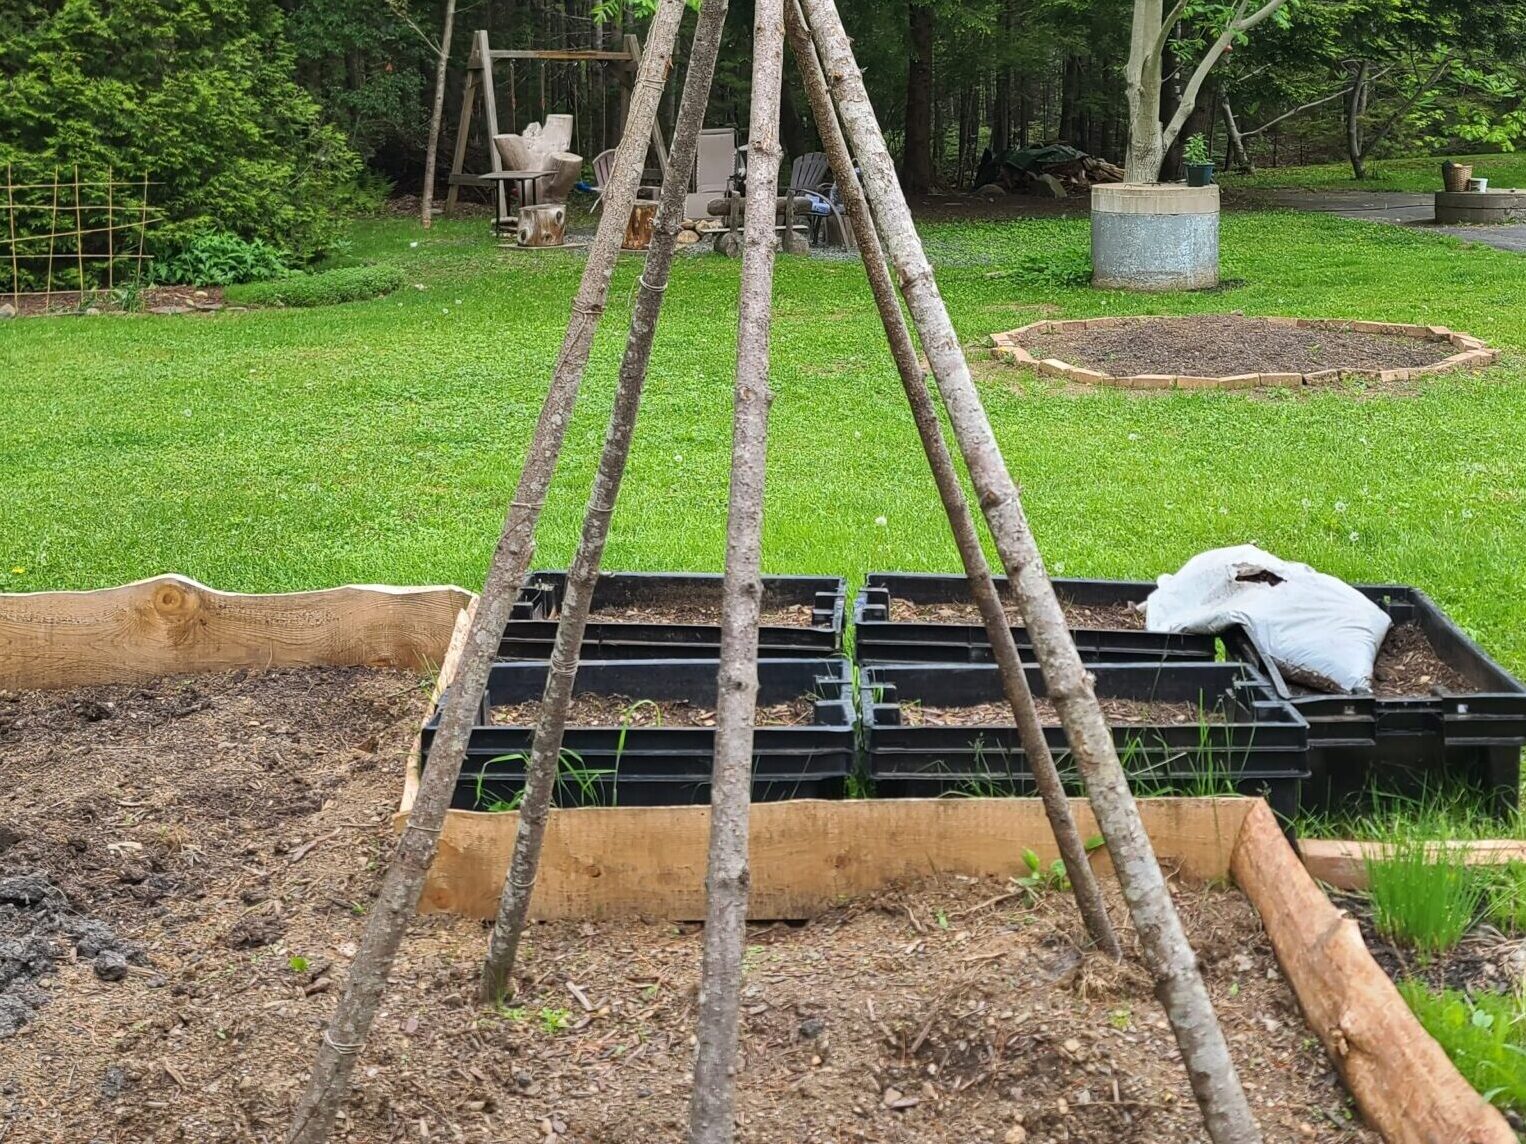 Picture of a teepee trellis in a vegetable garden patch